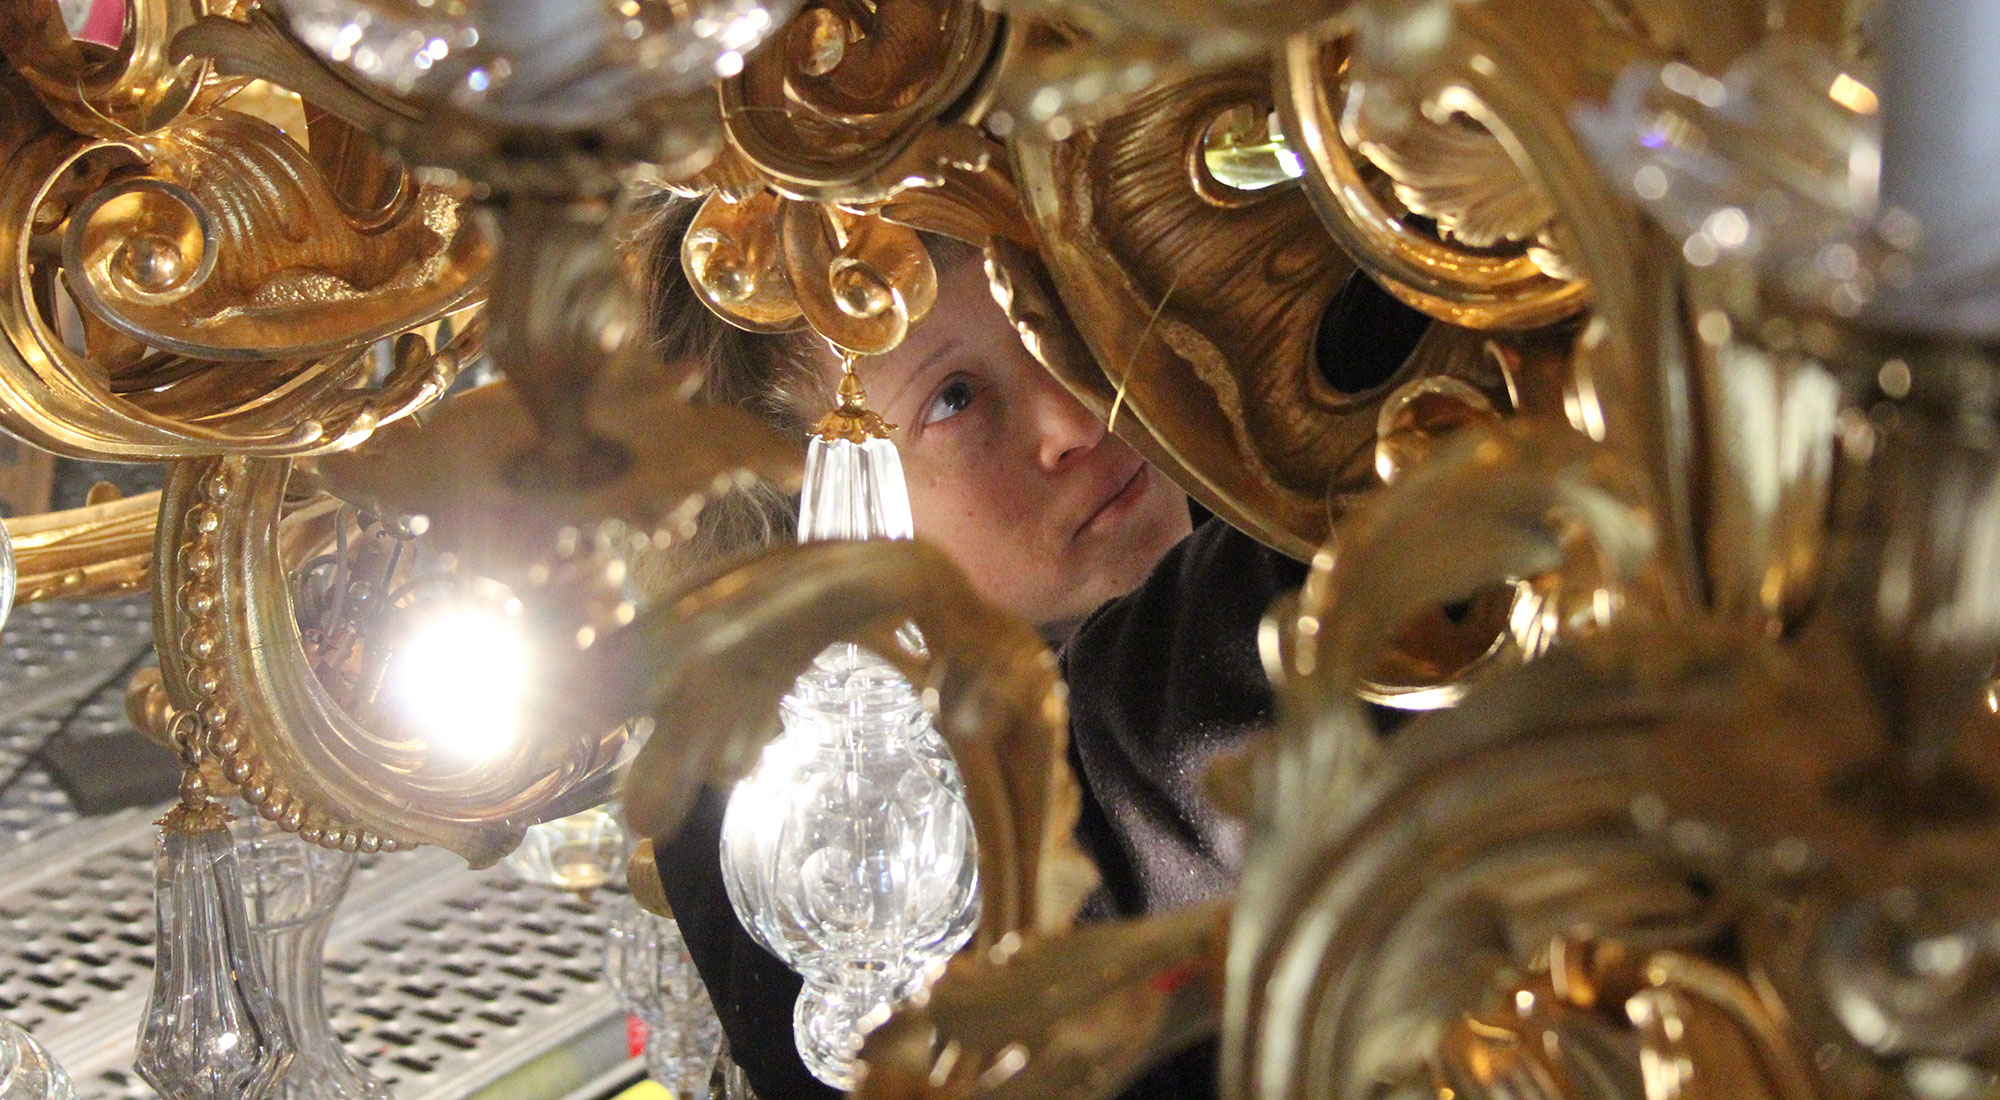 Fixing of the large pendulums of the Quadratsaal chandelier at the Liechtenstein Palace